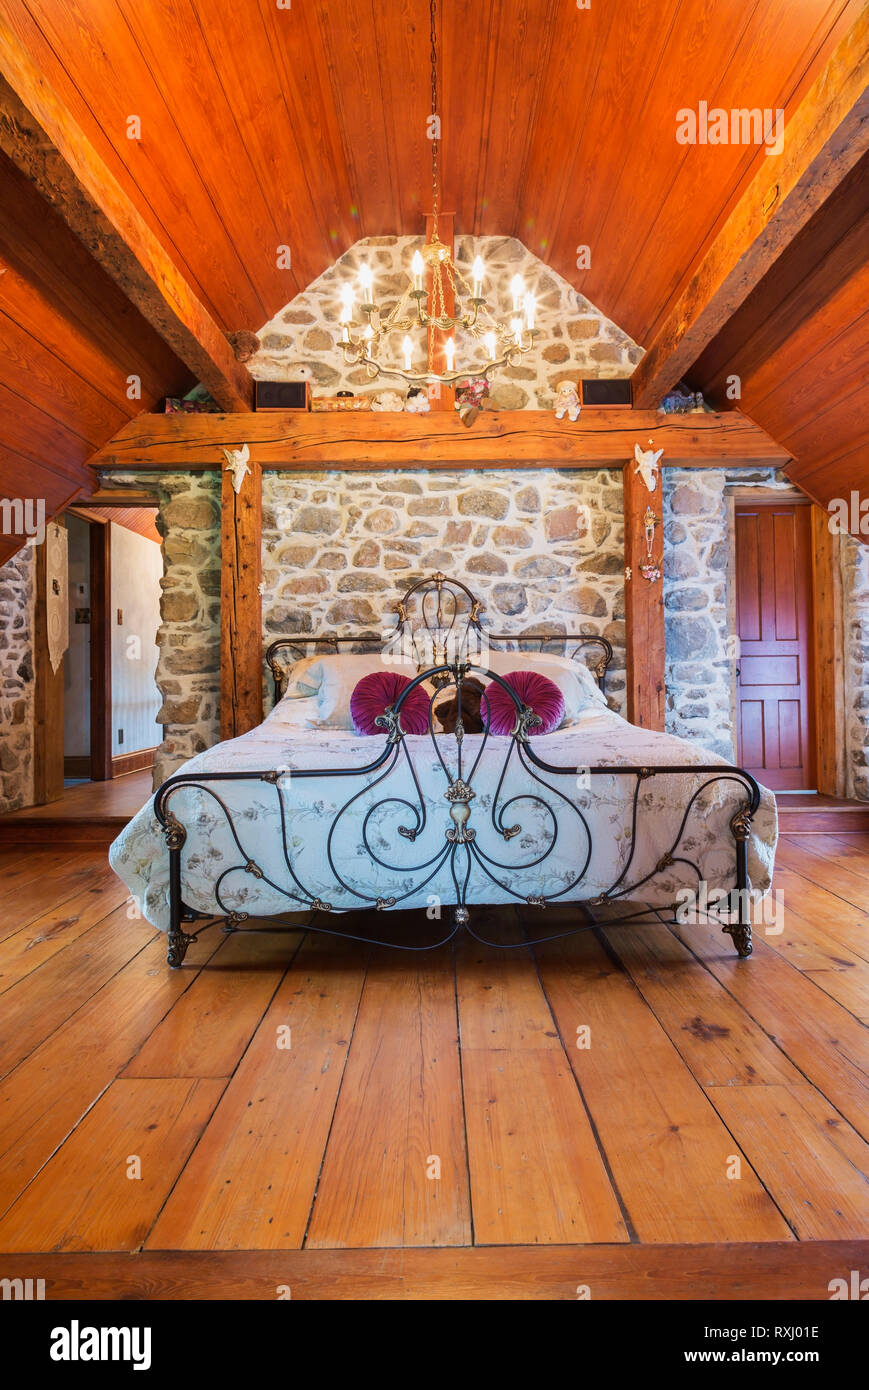 King Size Bed With Antique Wrought Iron Headboard And Footboard In Master Bedroom With Wide Pinewood Plank Floorboards On Upstairs Floor Inside An Old 1826 Cottage Style Fieldstone House Quebec Canada This